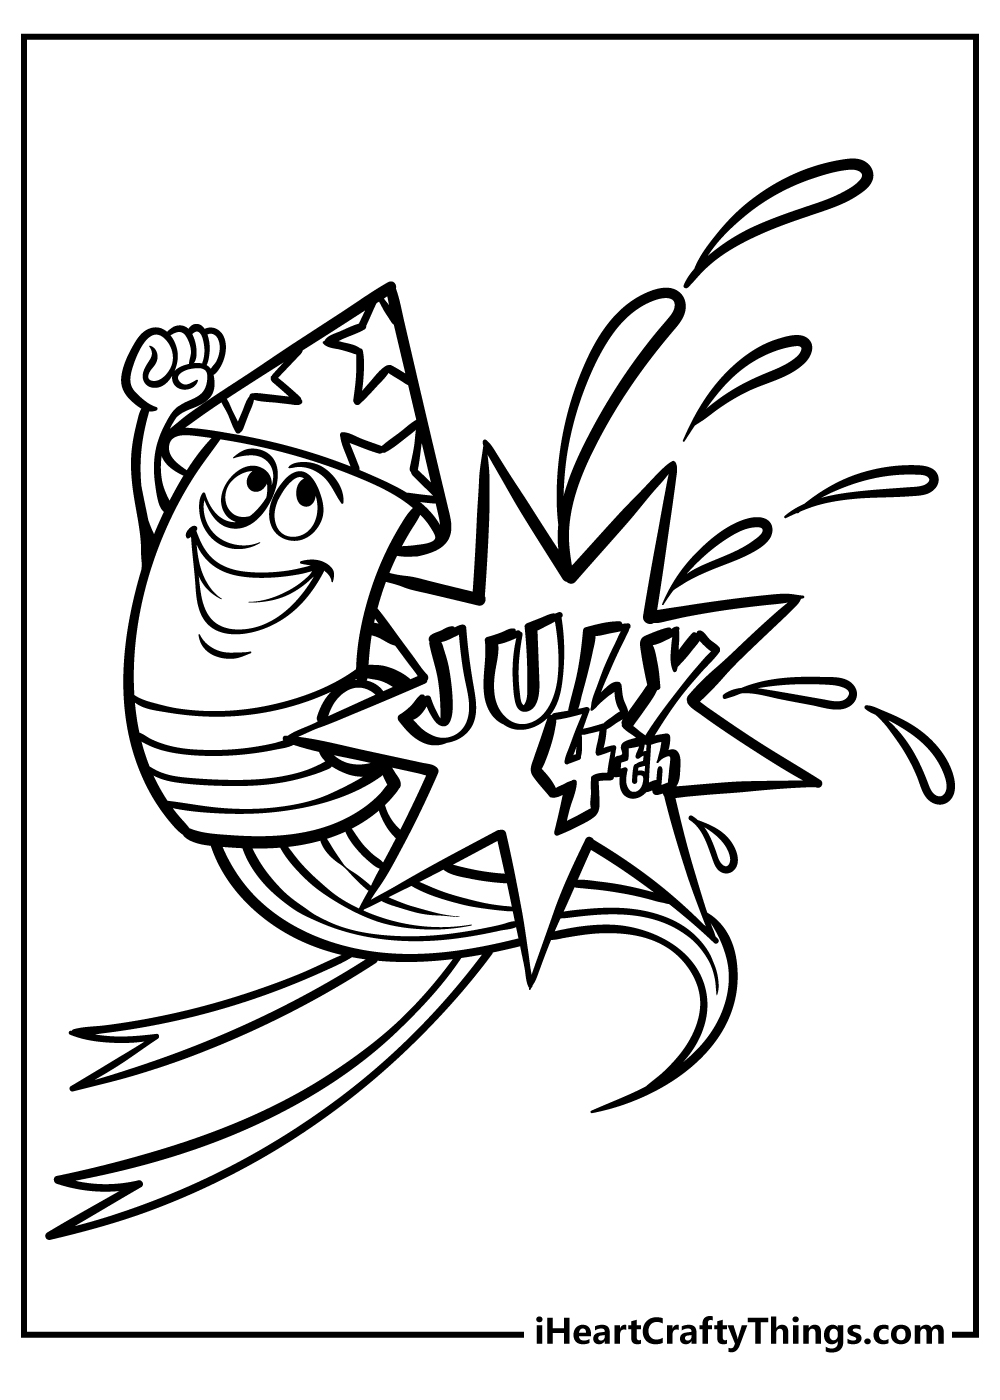 4th Of July Coloring Pages free pdf download